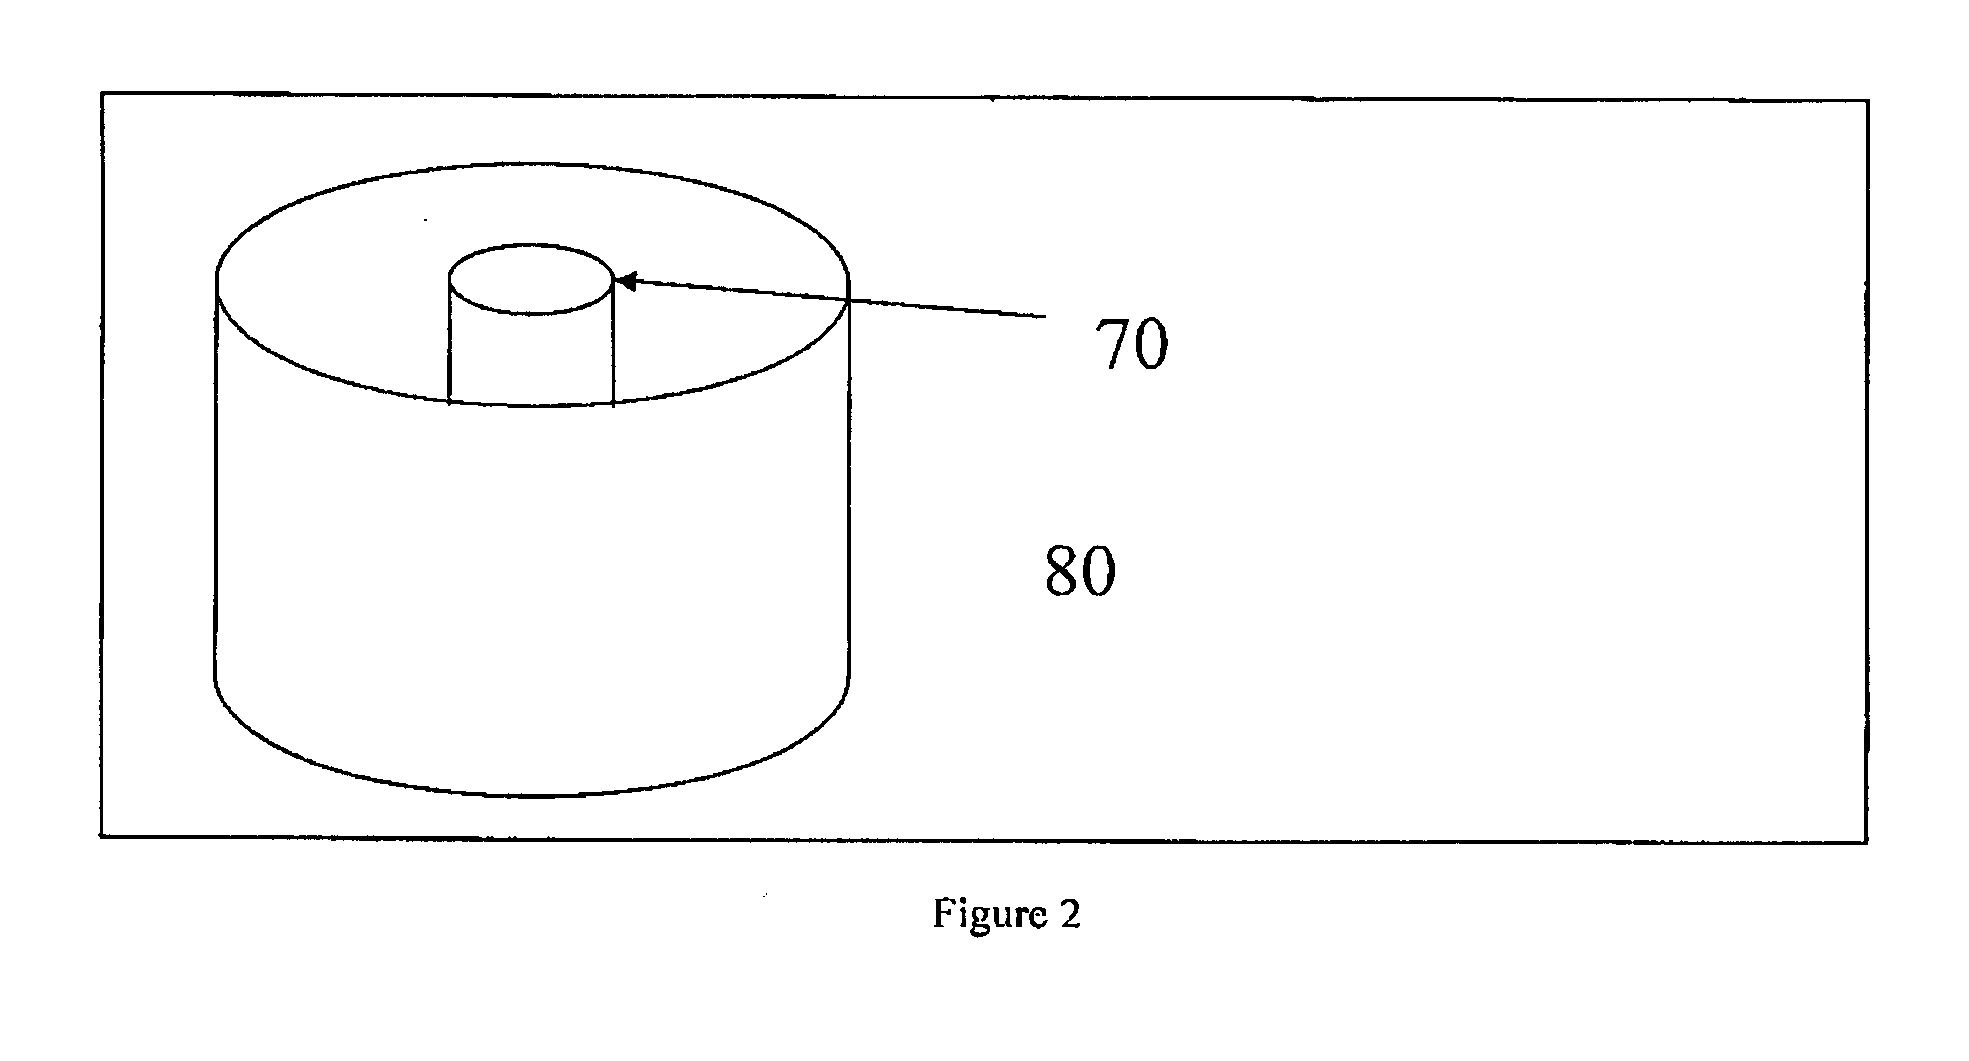 Method for monitoring or tracing operations in well boreholes